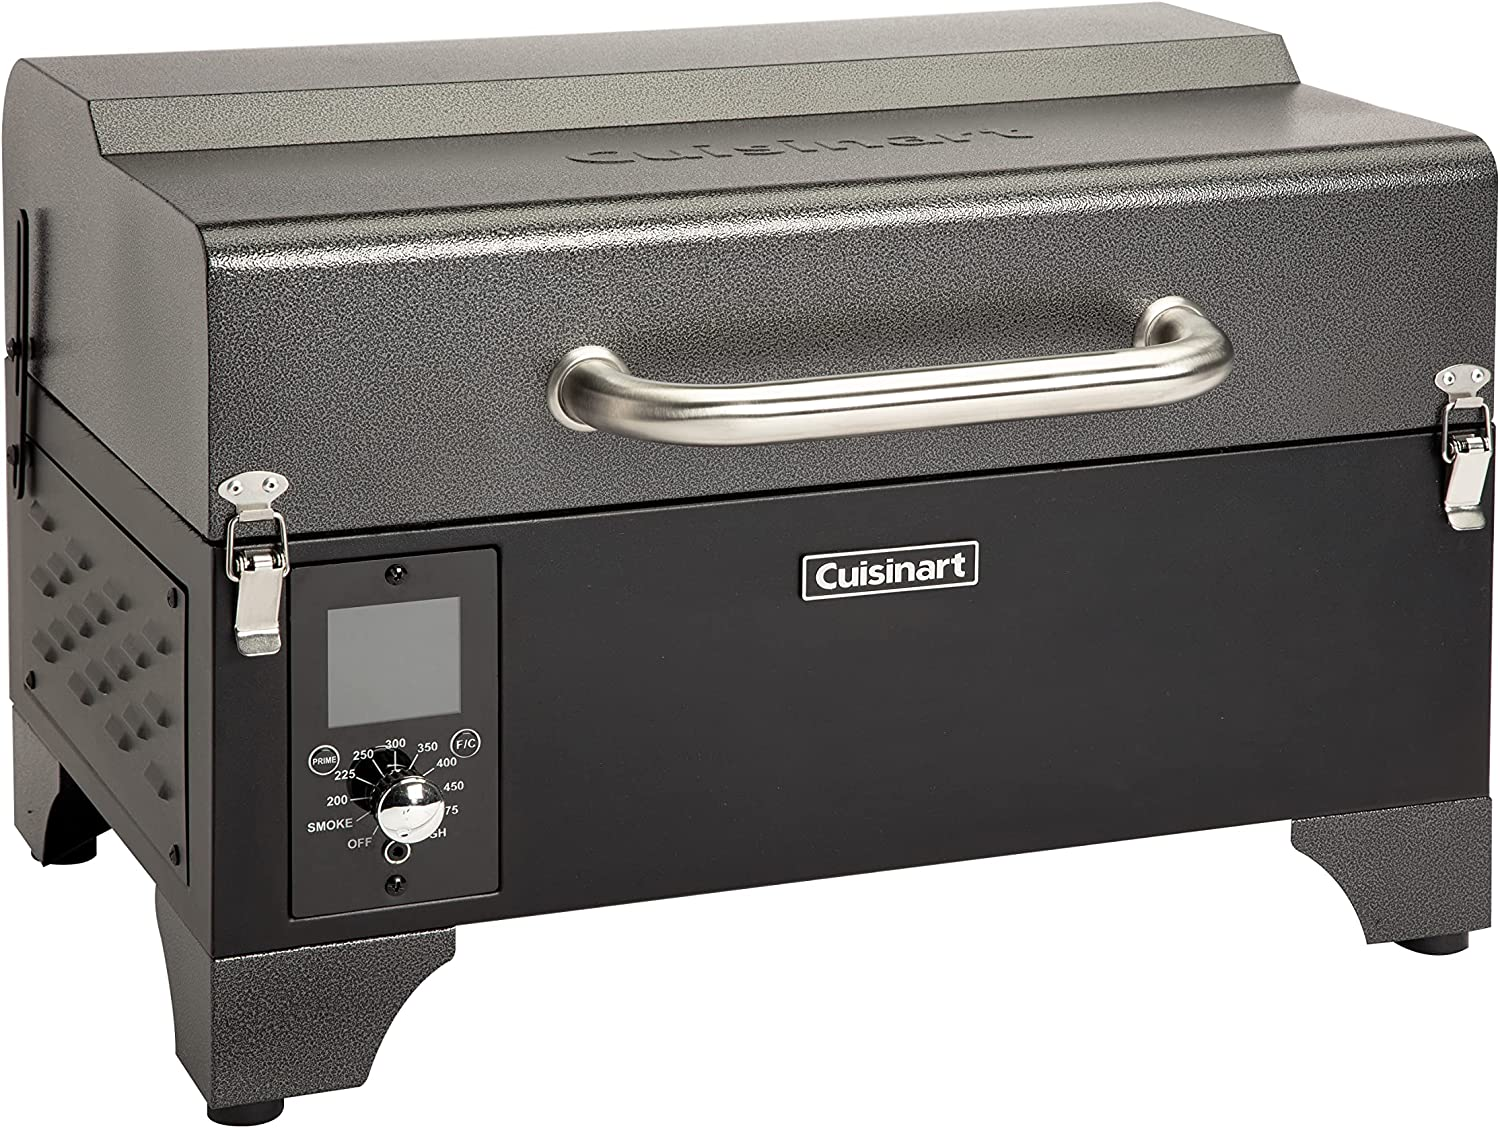 Cuisinart CPG-256 Portable Wood Pellet Grill and Smoker $252.99